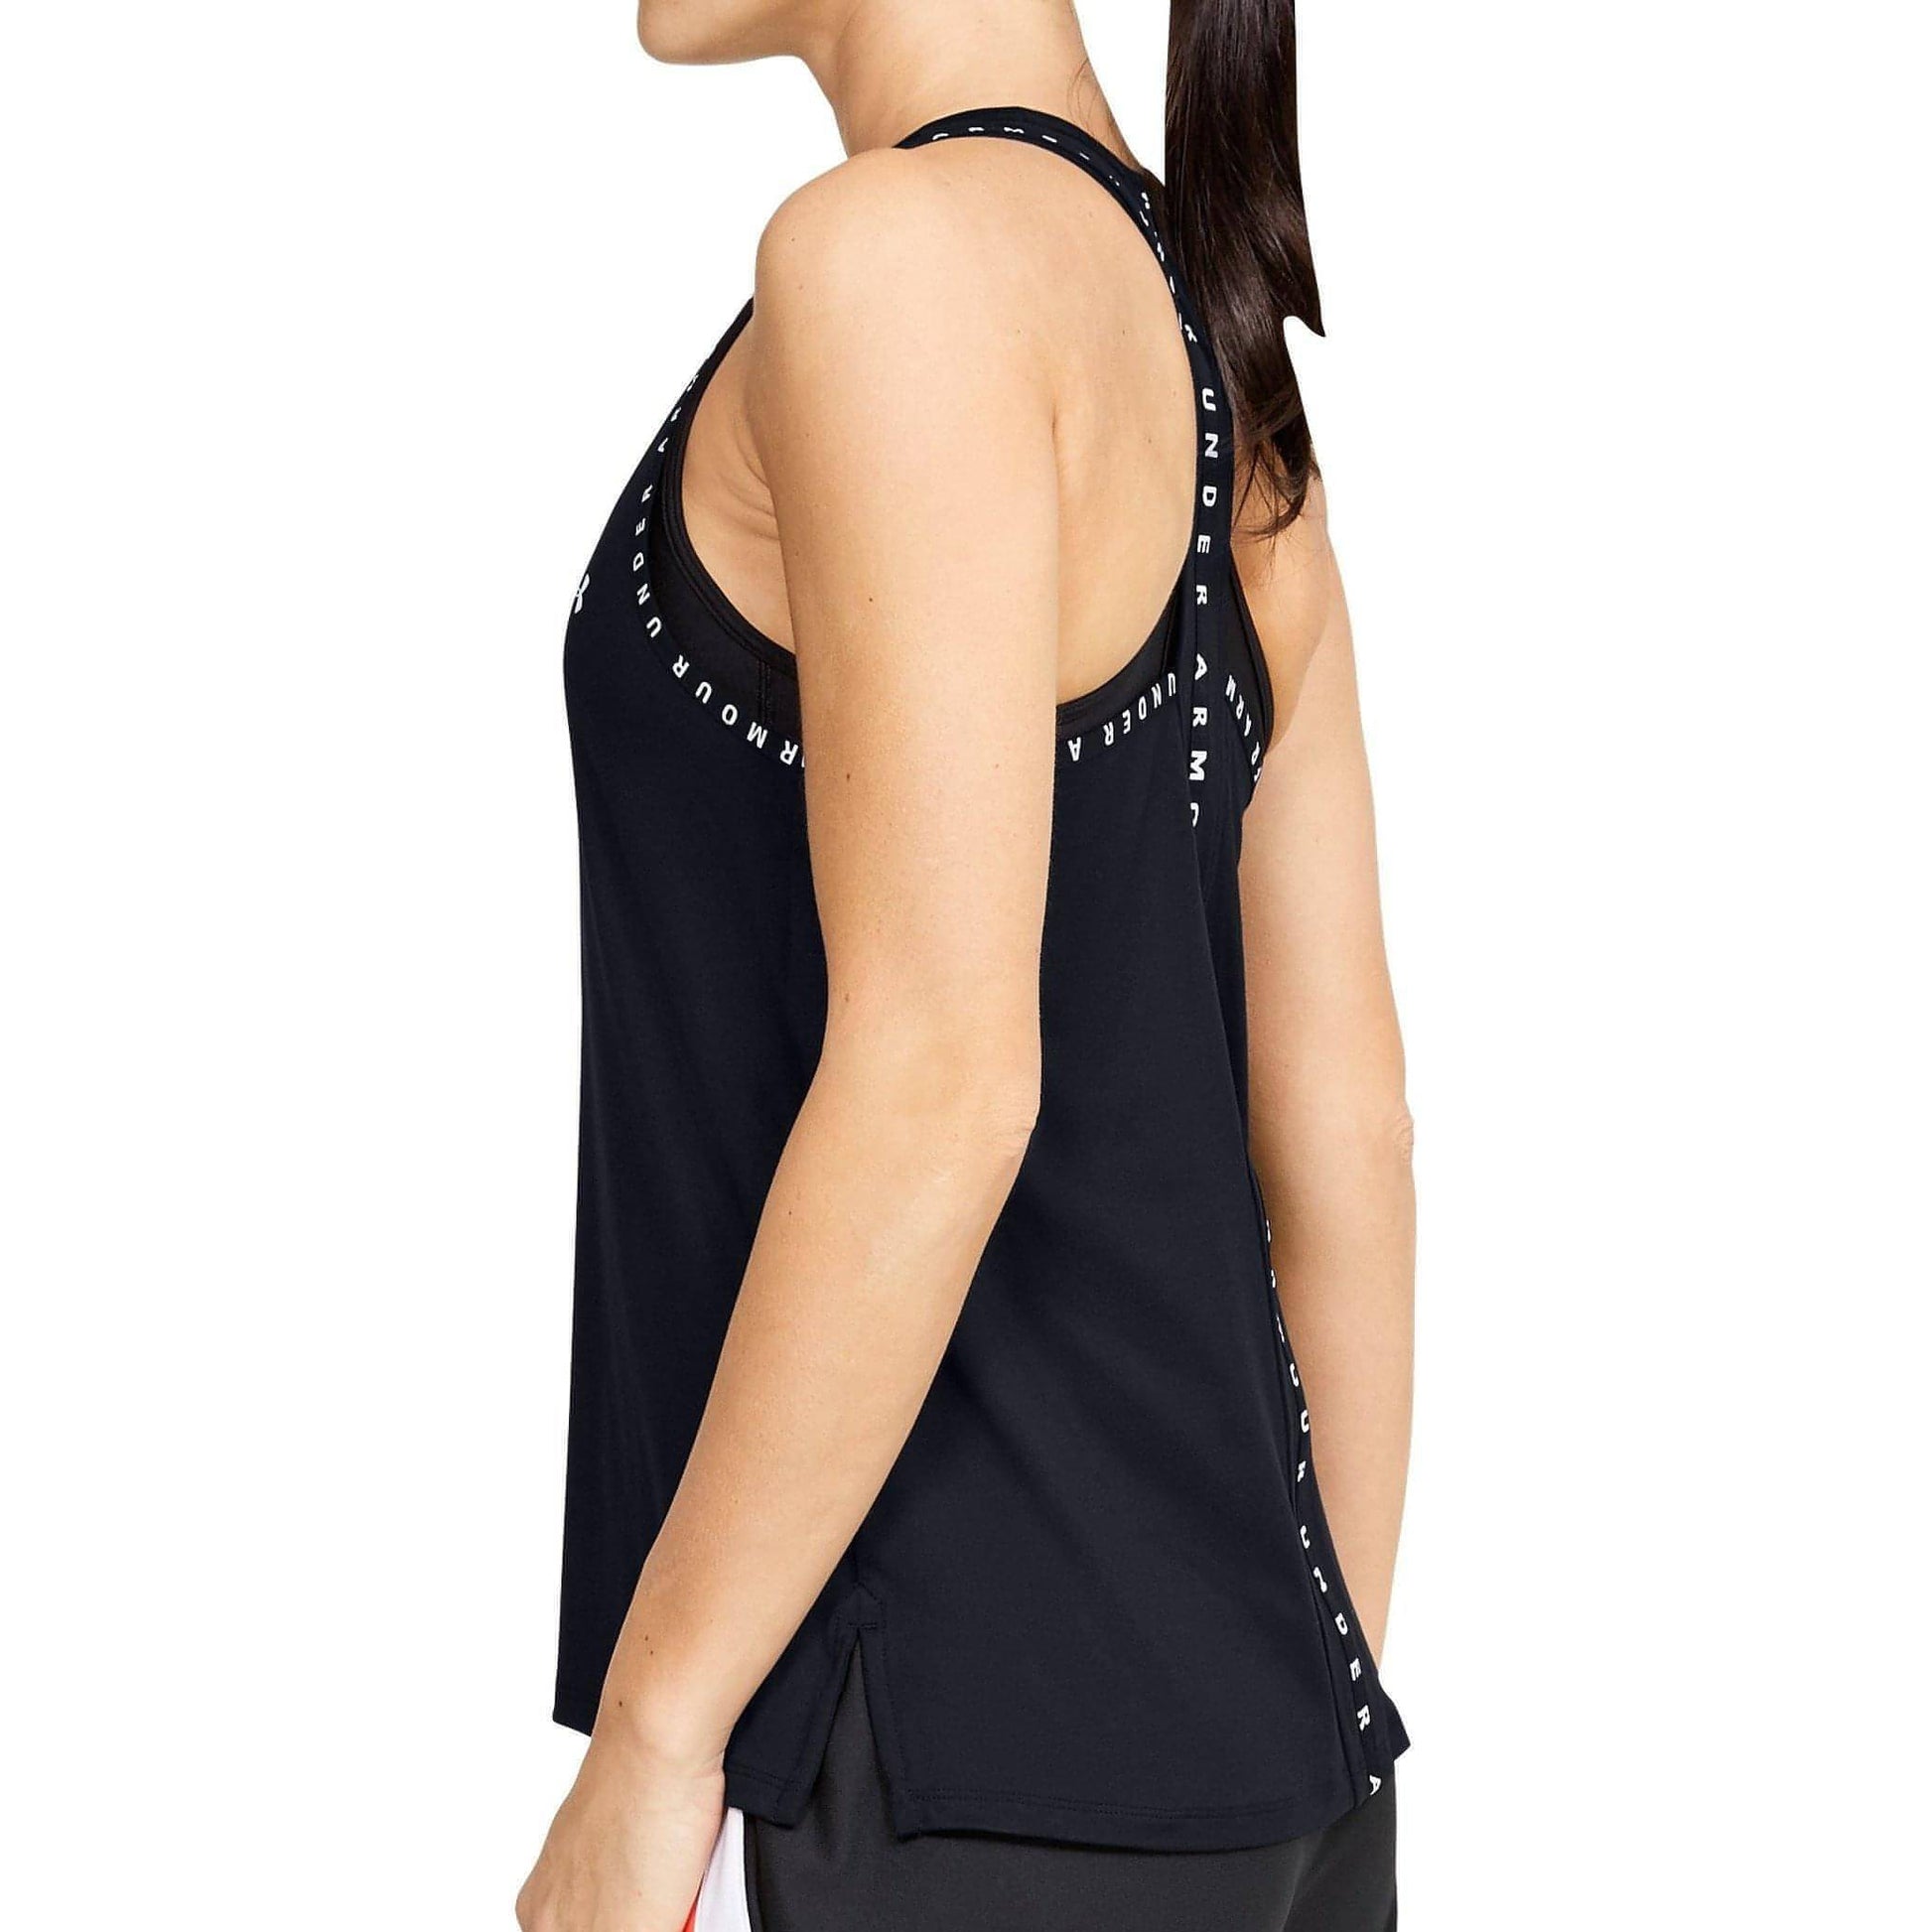 Under Armour Knockout Womens Training Vest Tank Top - Black - Start Fitness